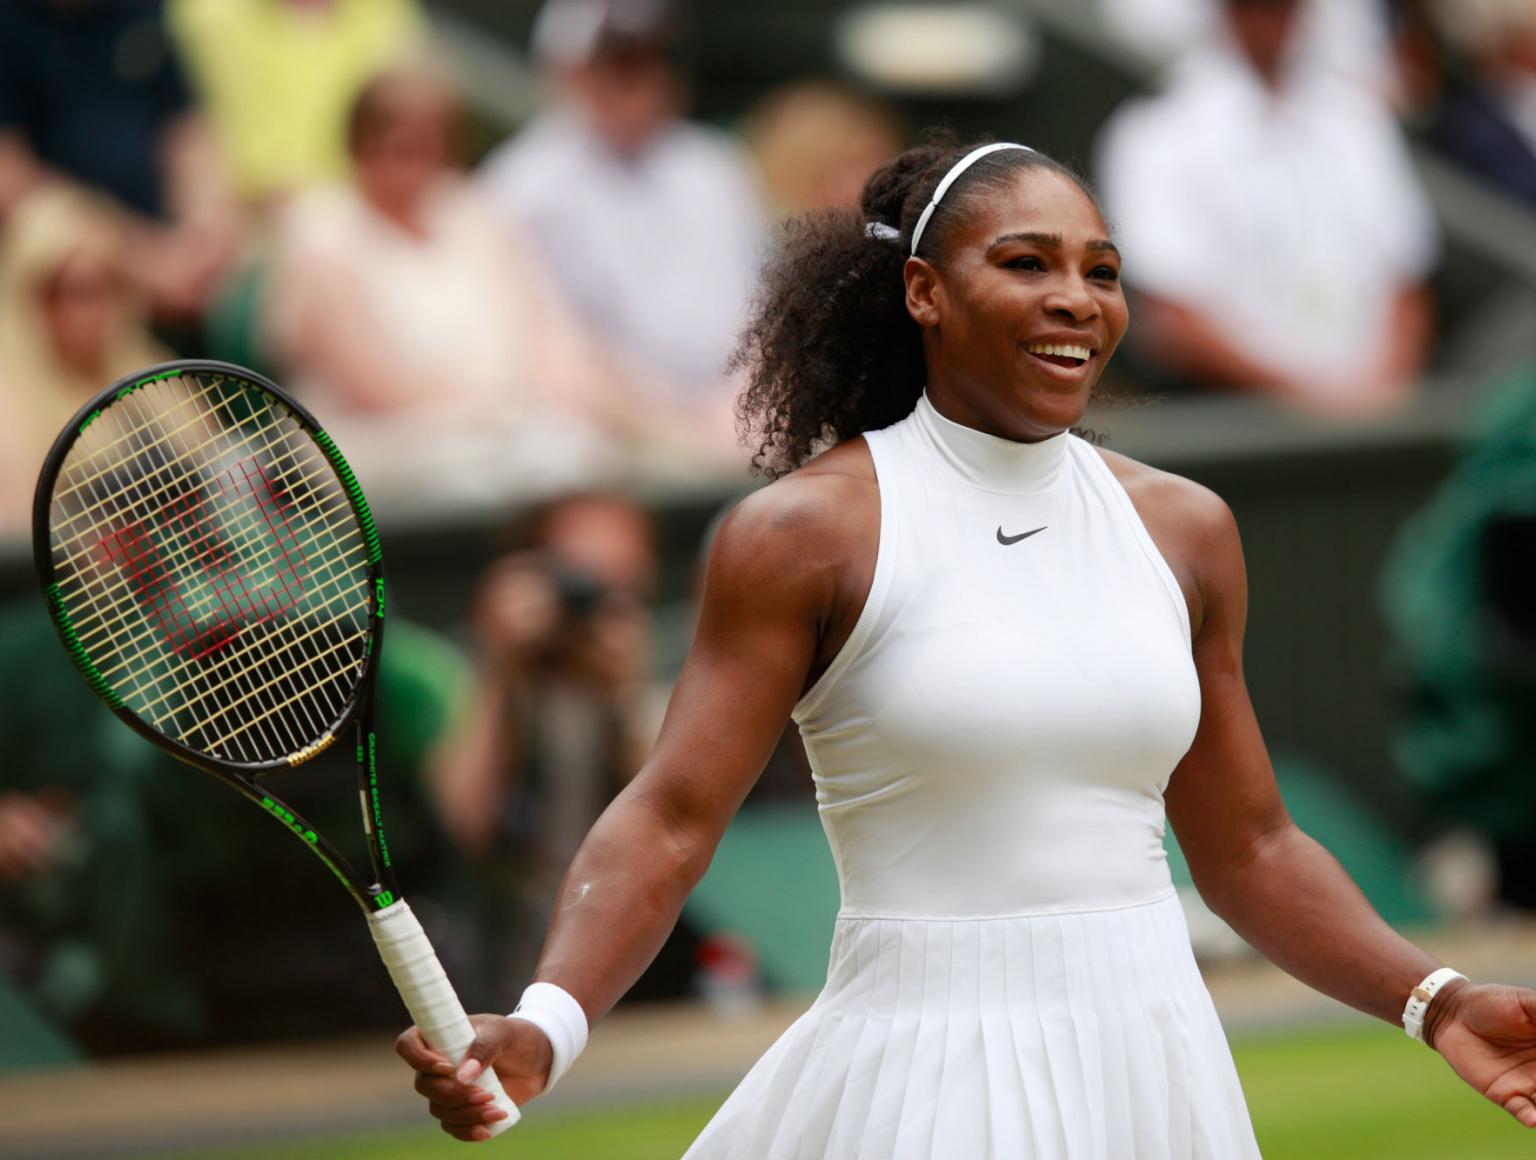 Serena Williams dressed in Nike logo white athletic top and white skirt, holding a tennis racket. Action shot